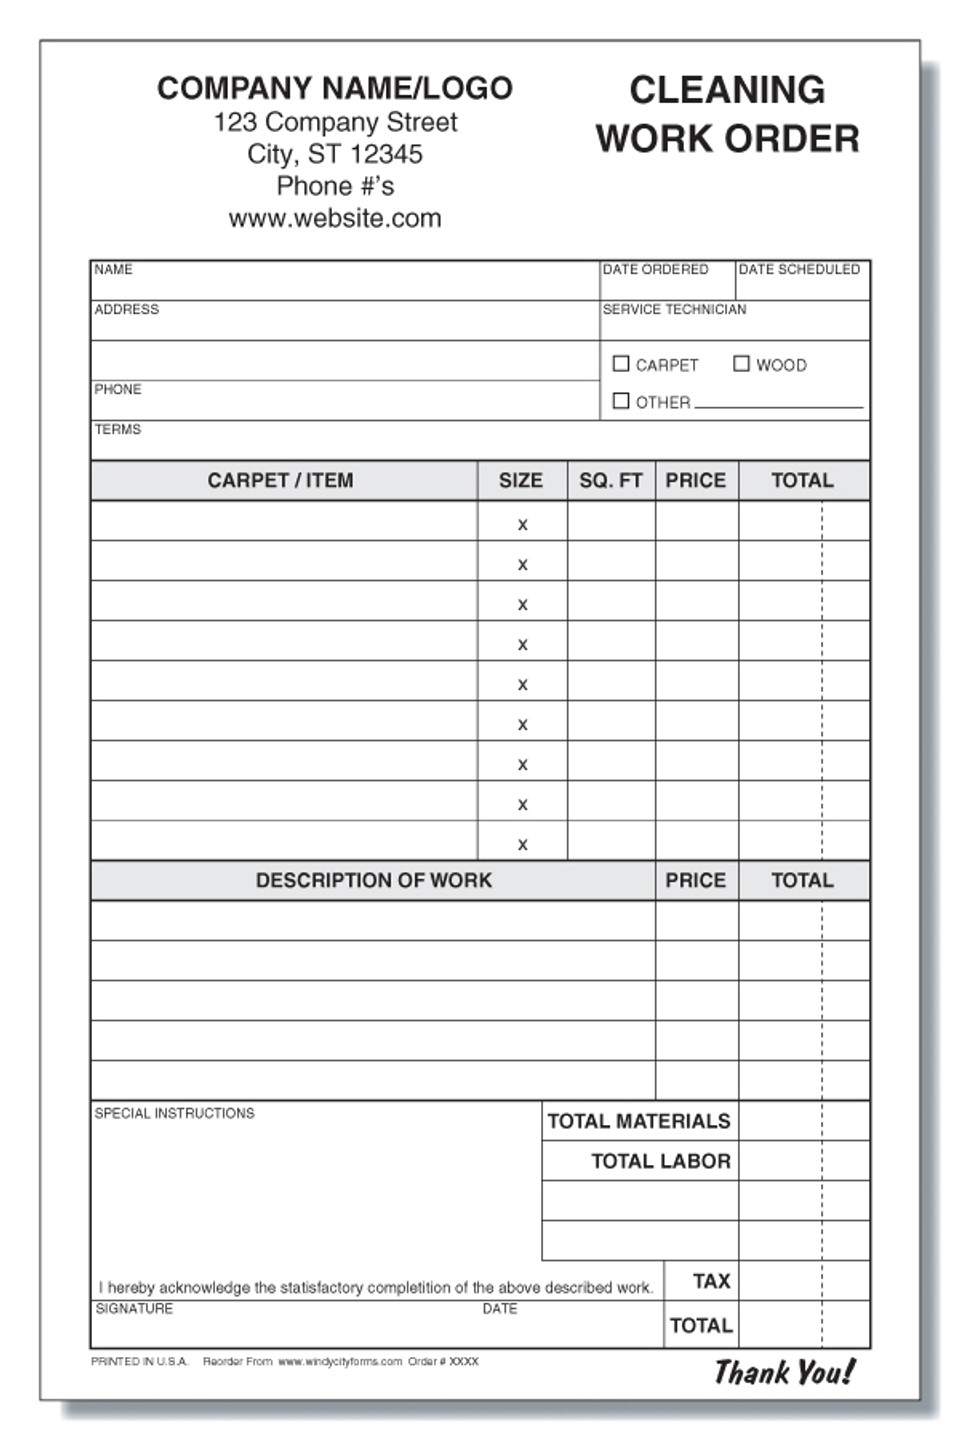 Cleaning Work Order Invoice 5 5 X 8 5 Windy City Forms